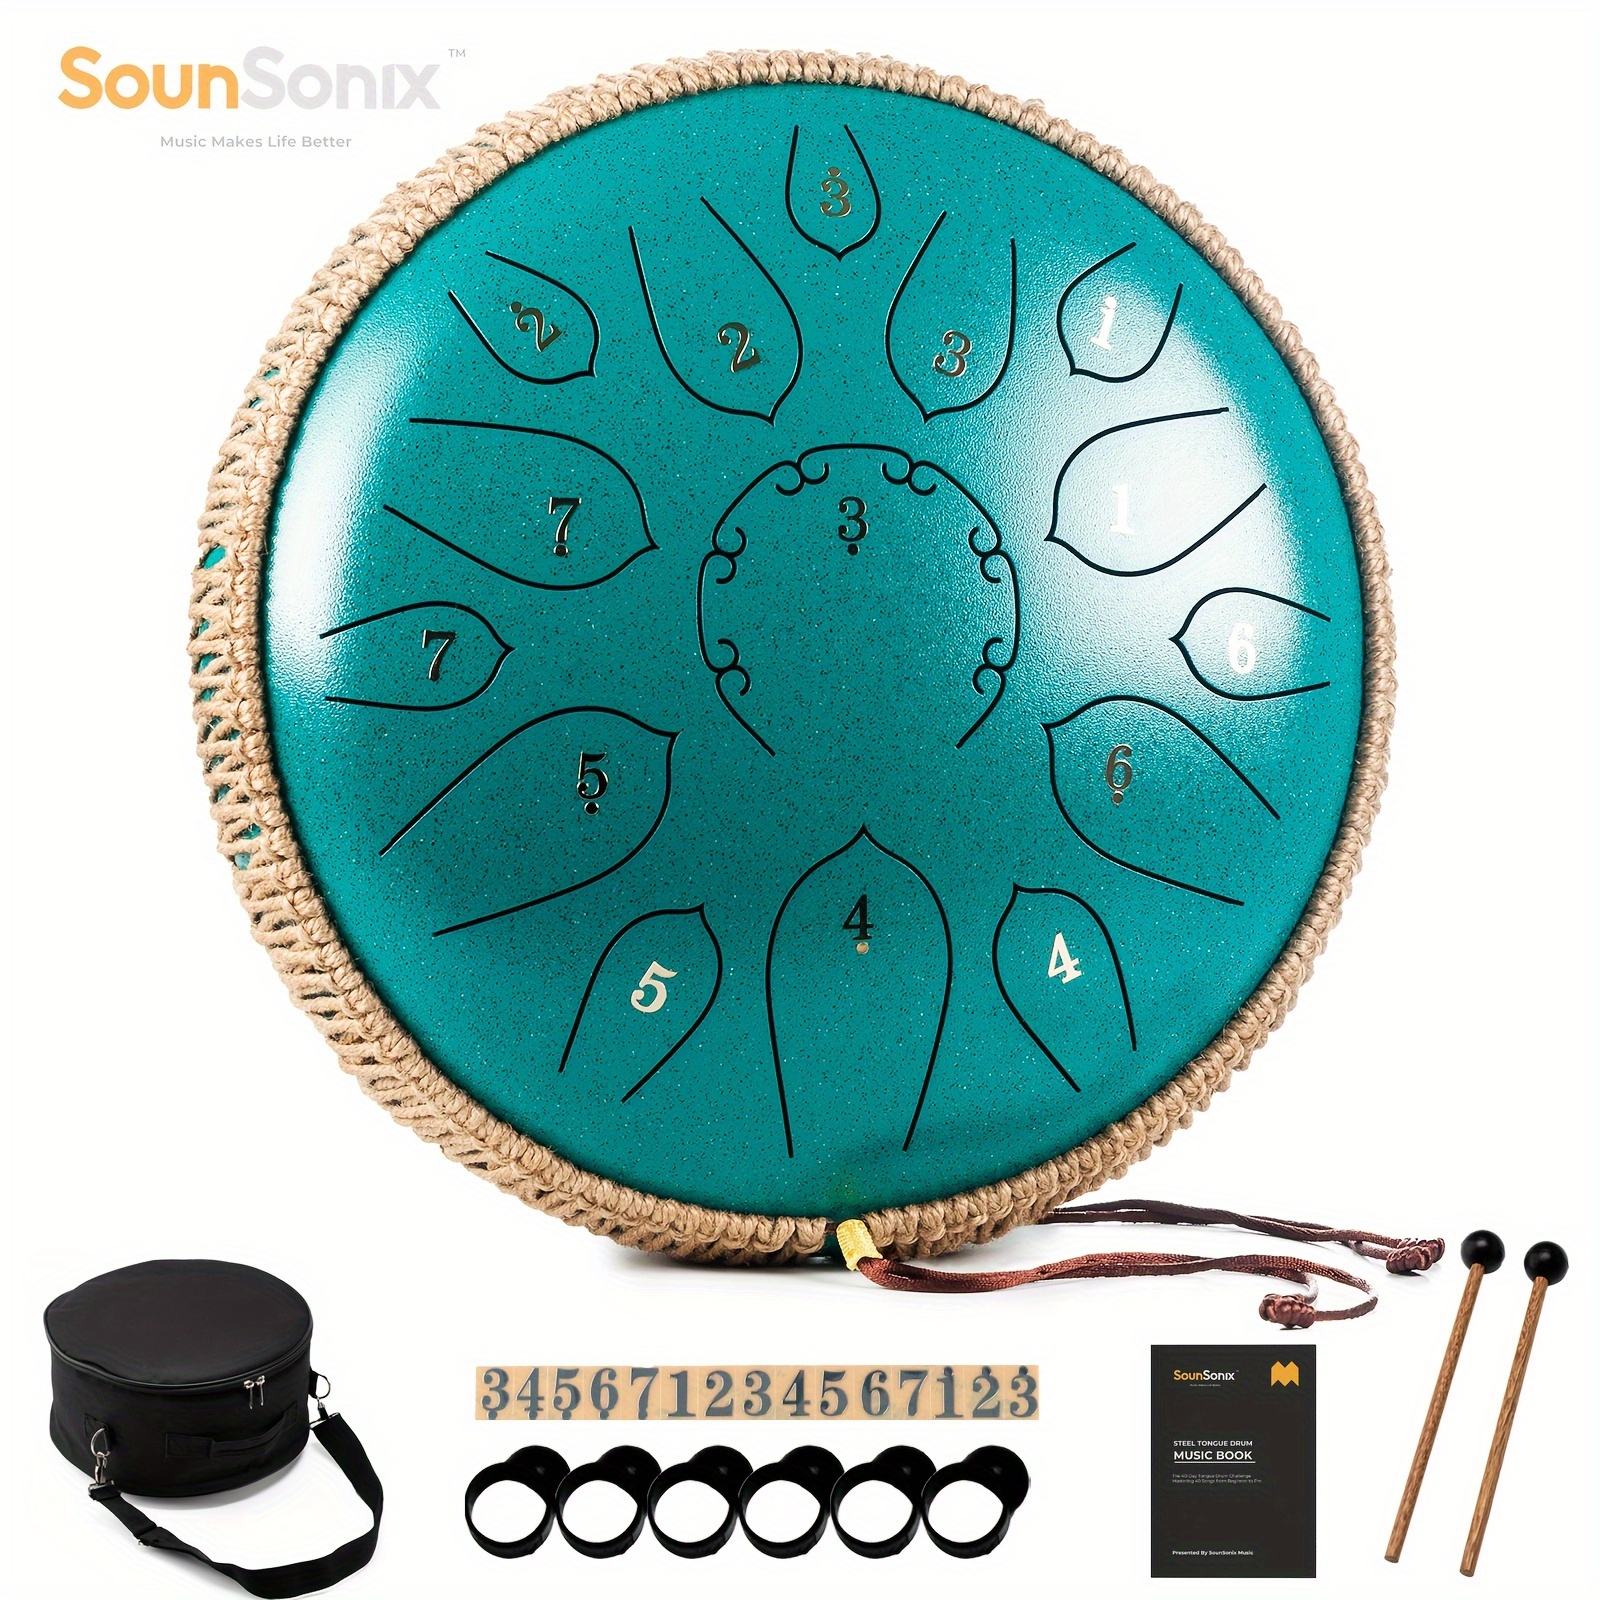  Steel Tongue Drum Panda Drum,12 Inch 13 Note Tank drum  percussion instrument,C Key Handpan Drum with Drum Mallets Carry  Bag,Beautifully Designed and Peaceful Sound : Musical Instruments